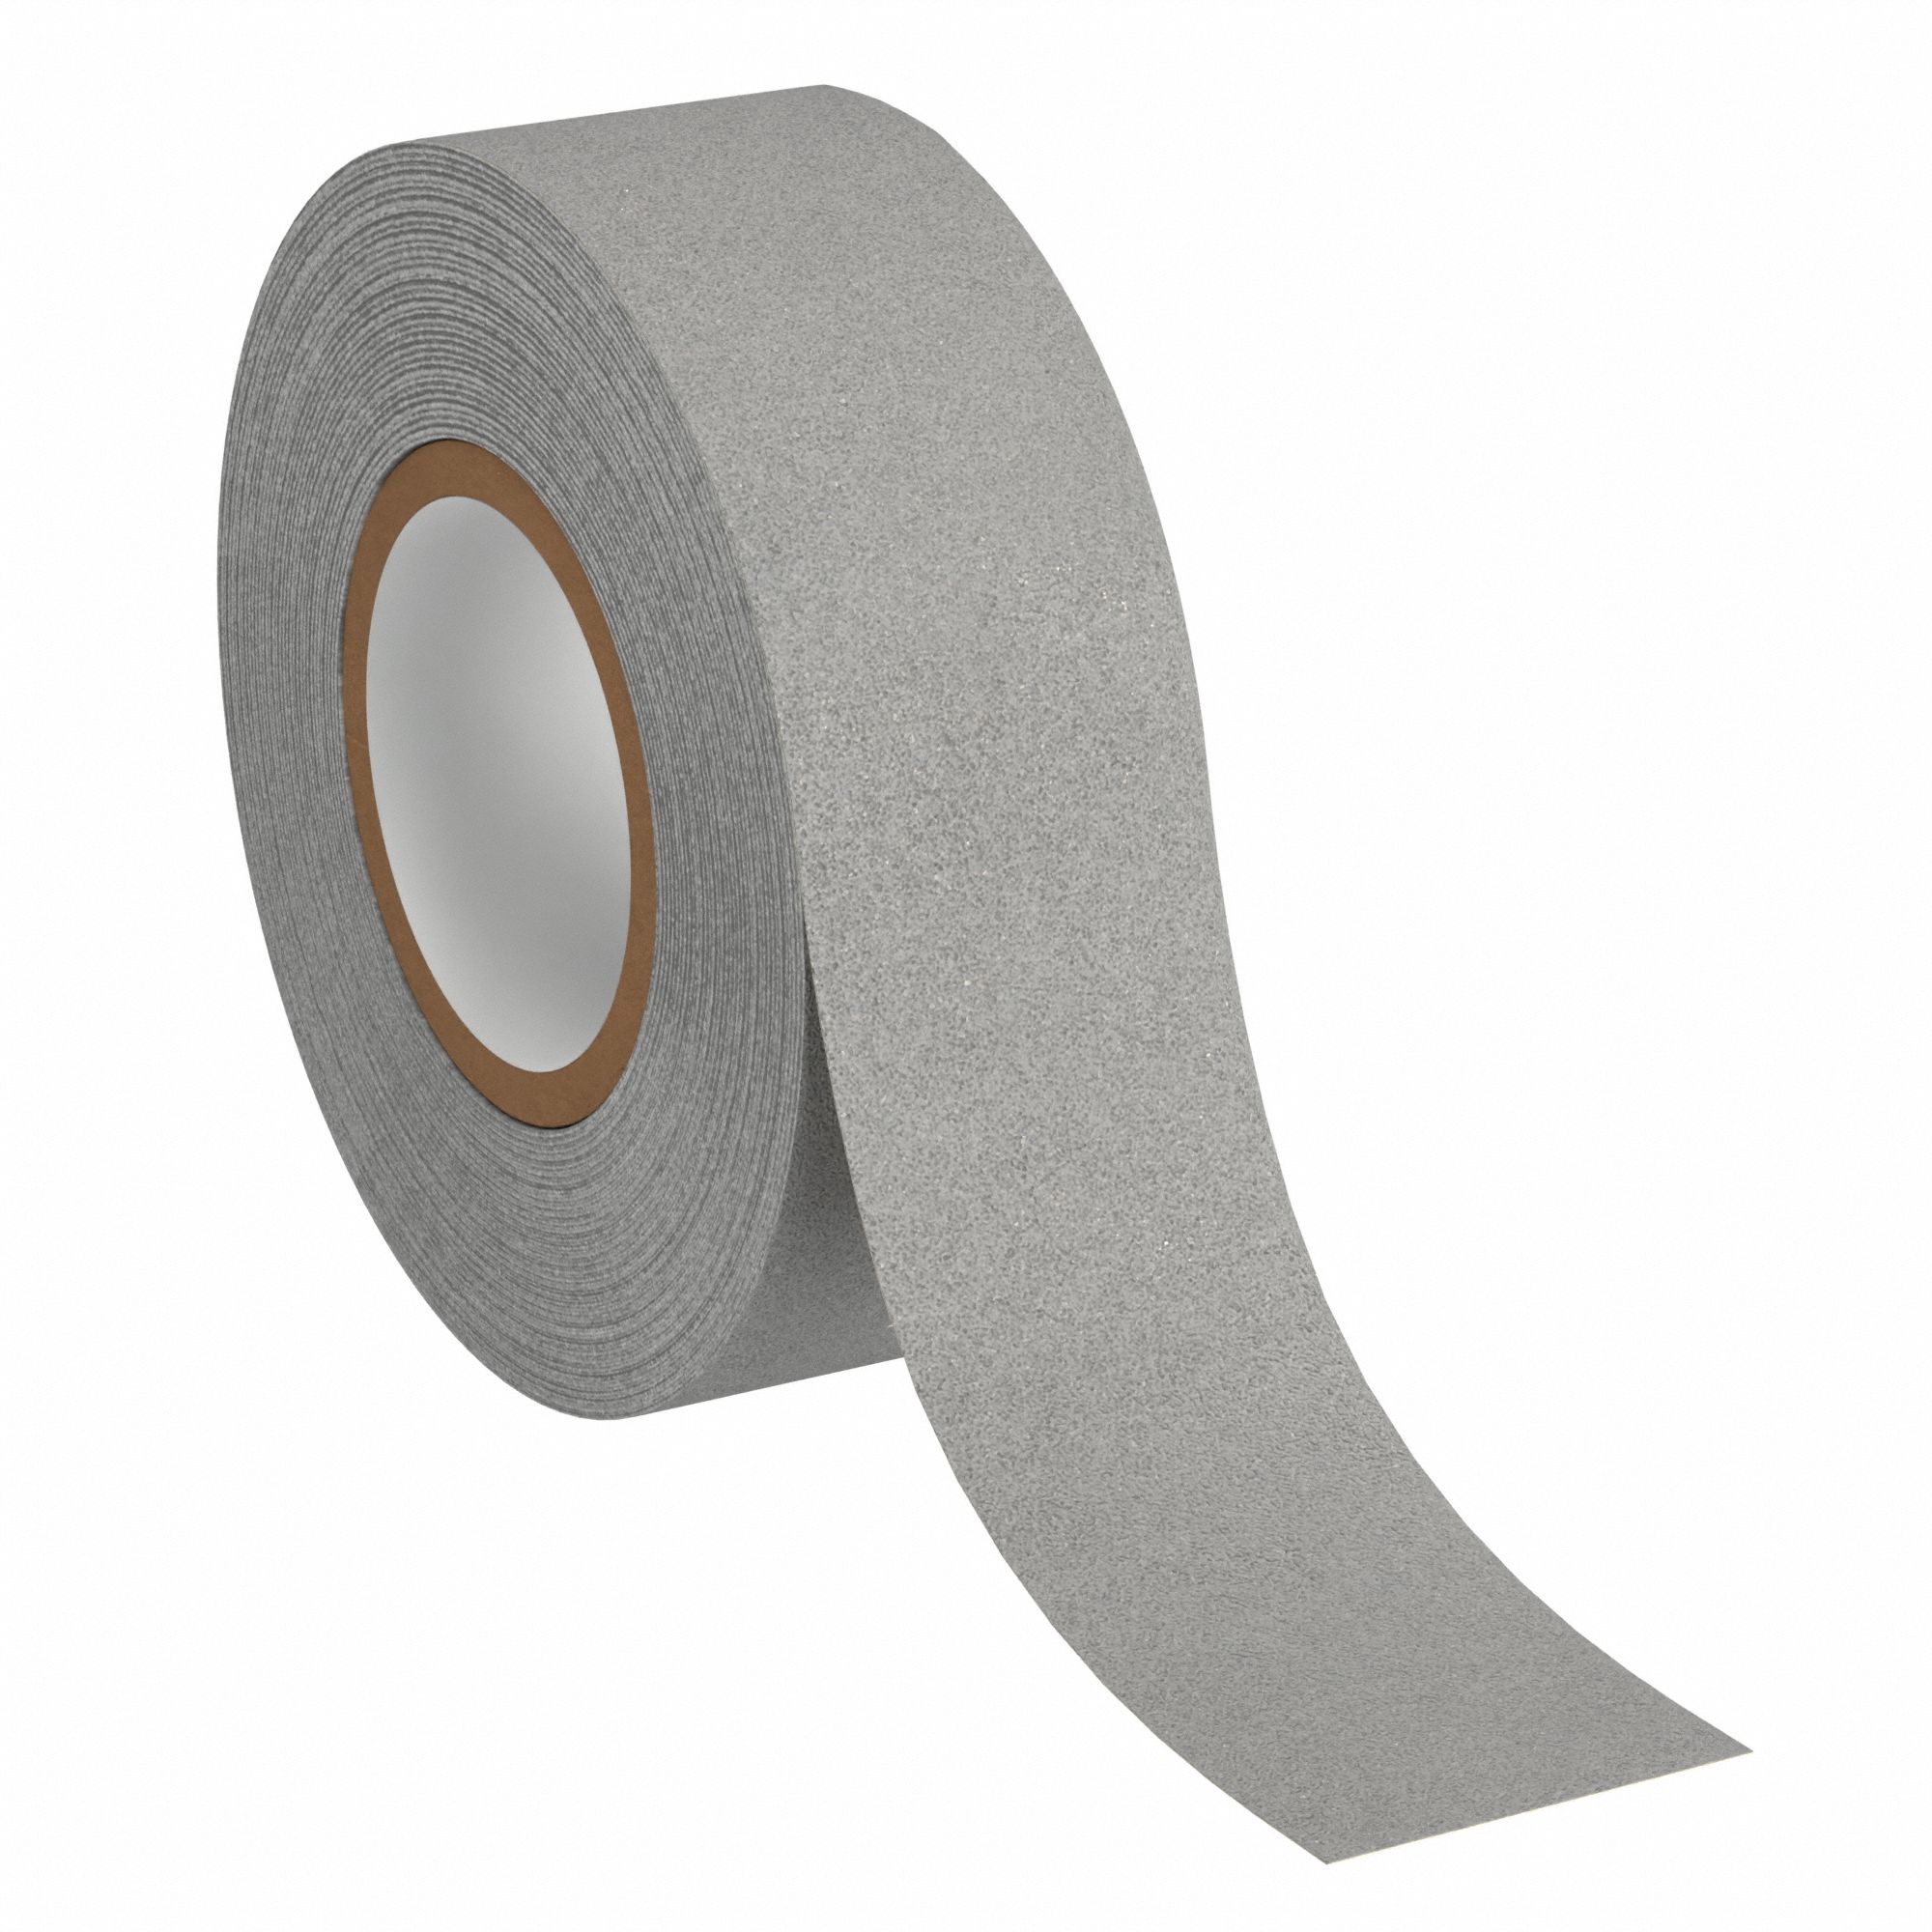 3M ANTI-SLIP TAPE, PRESSURE-SENSITIVE ADHESIVE BACKING, GREY, 60 FT L/2 IN  W - Antislip Tapes, Treads & Stair Nosings - MMMF370GRY2X60